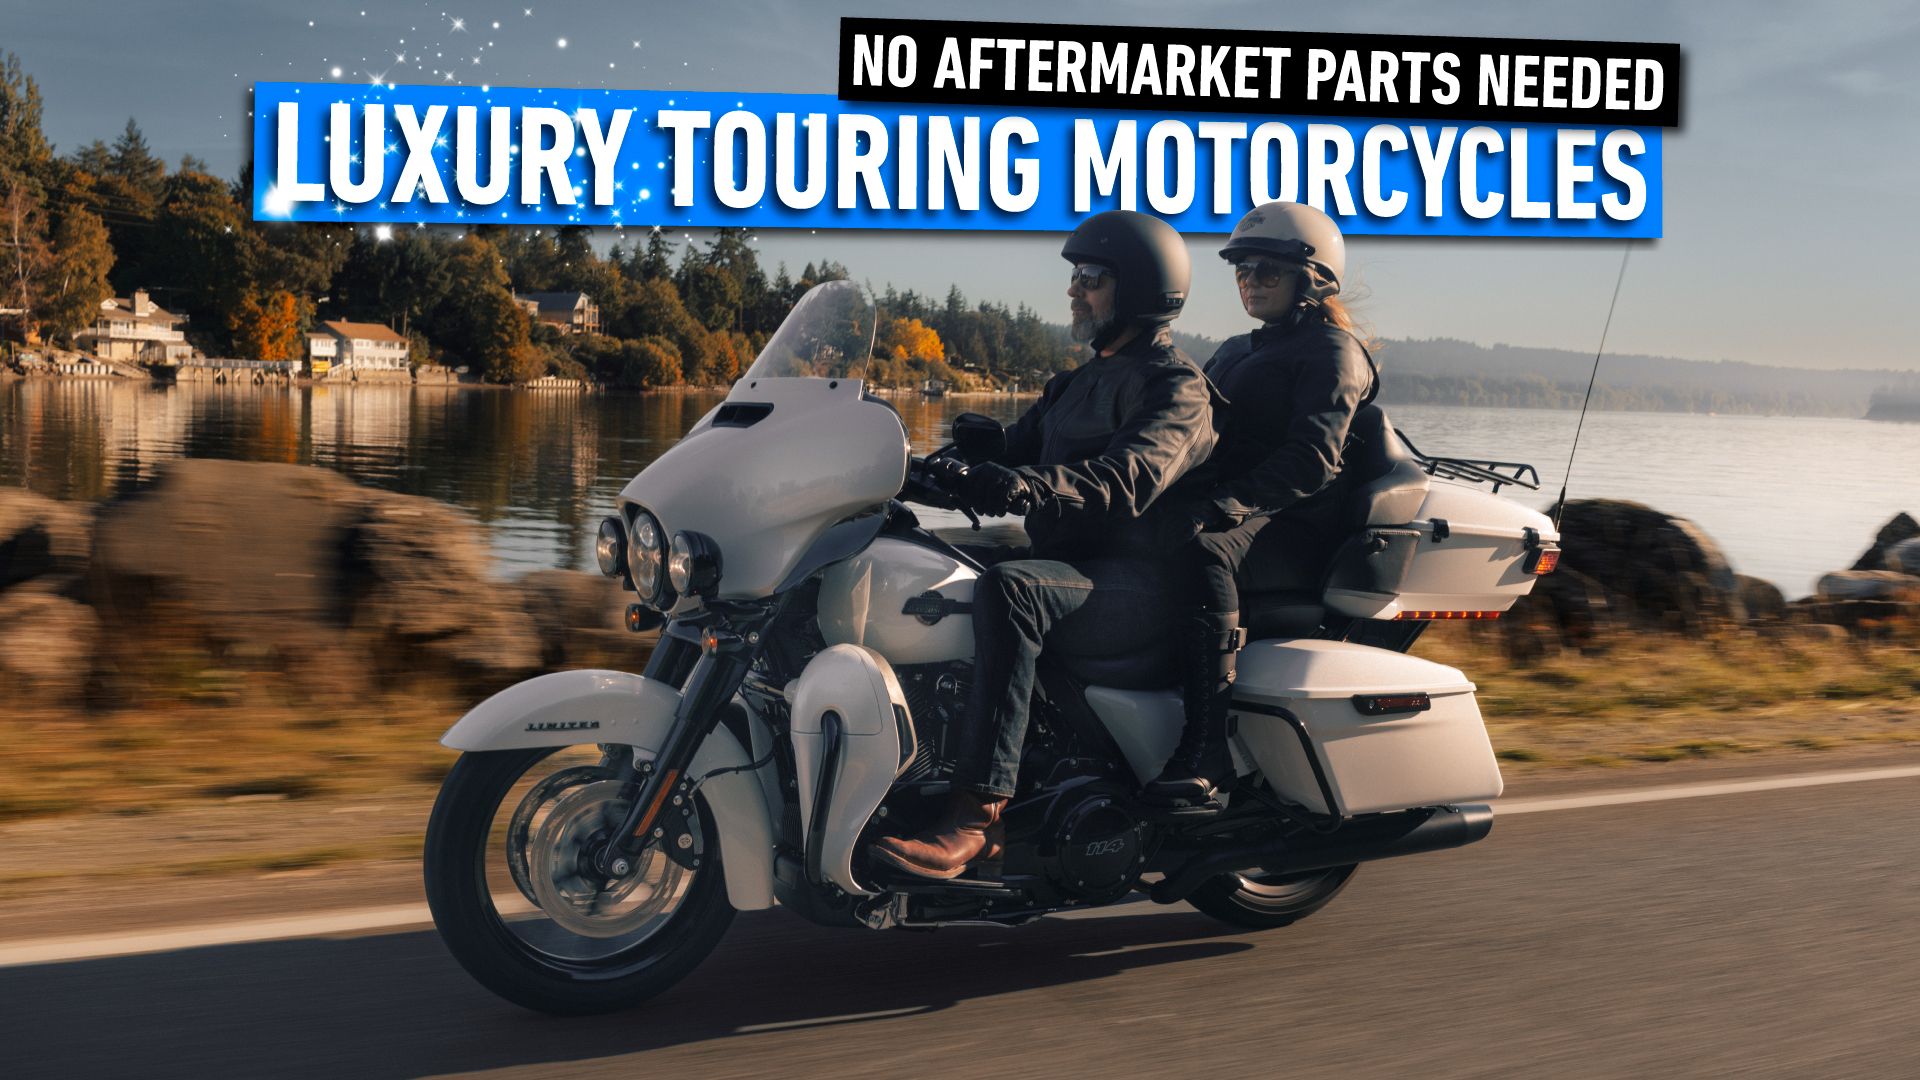 10 Touring Motorcycles So Luxurious, Aftermarket Changes Seem Pointless